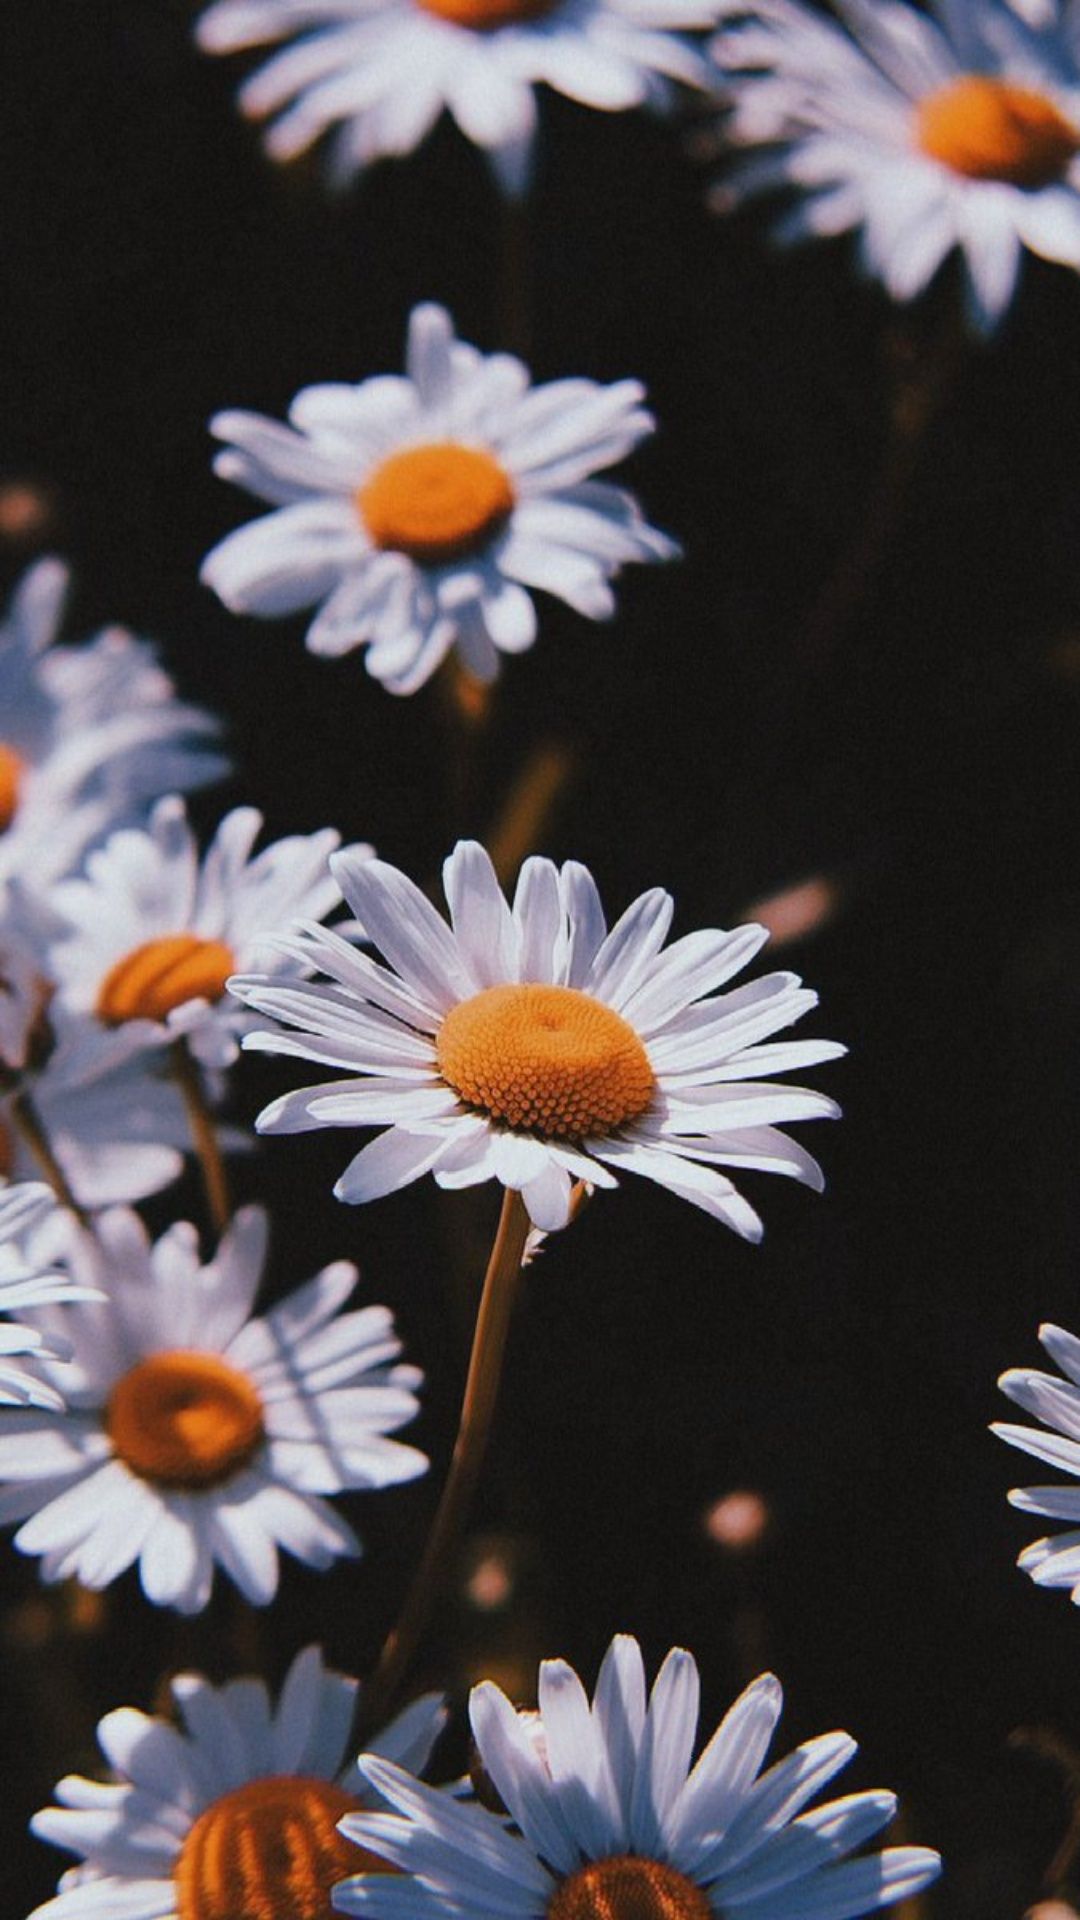 Daisy wallpaper for your iPhone 8 from Everpix. - Daisy